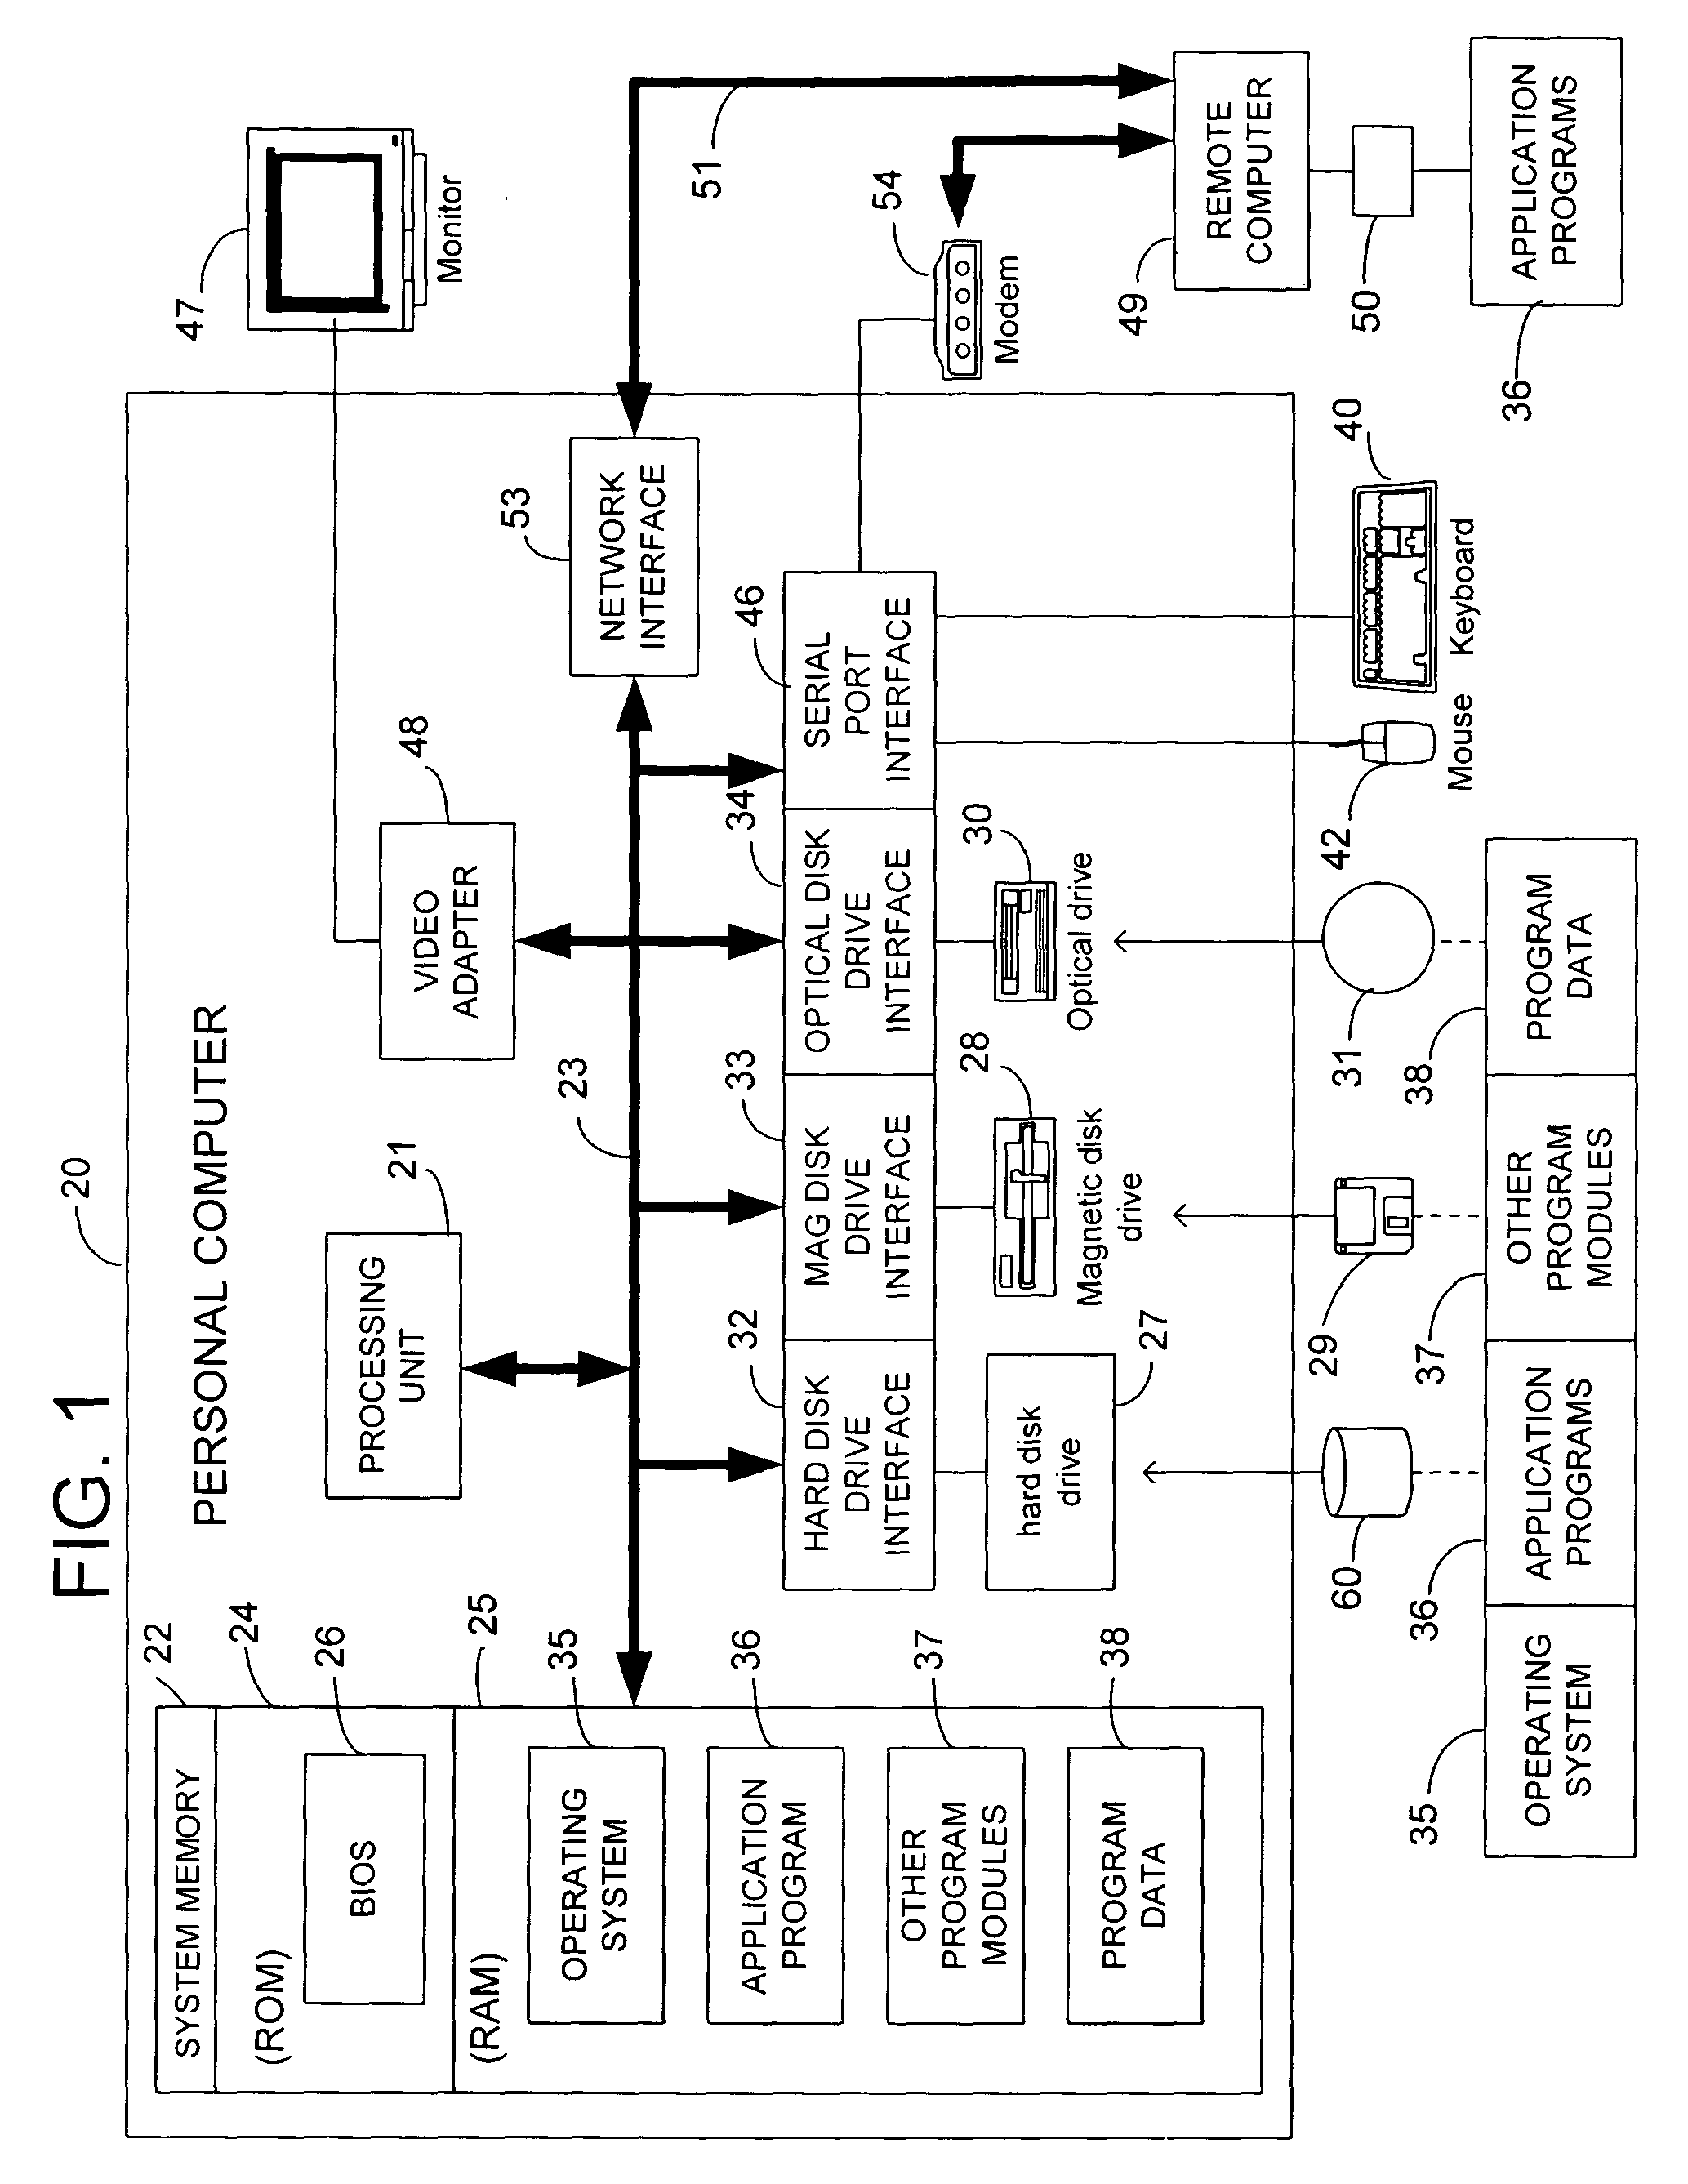 System and method for increasing data throughput using thread scheduling